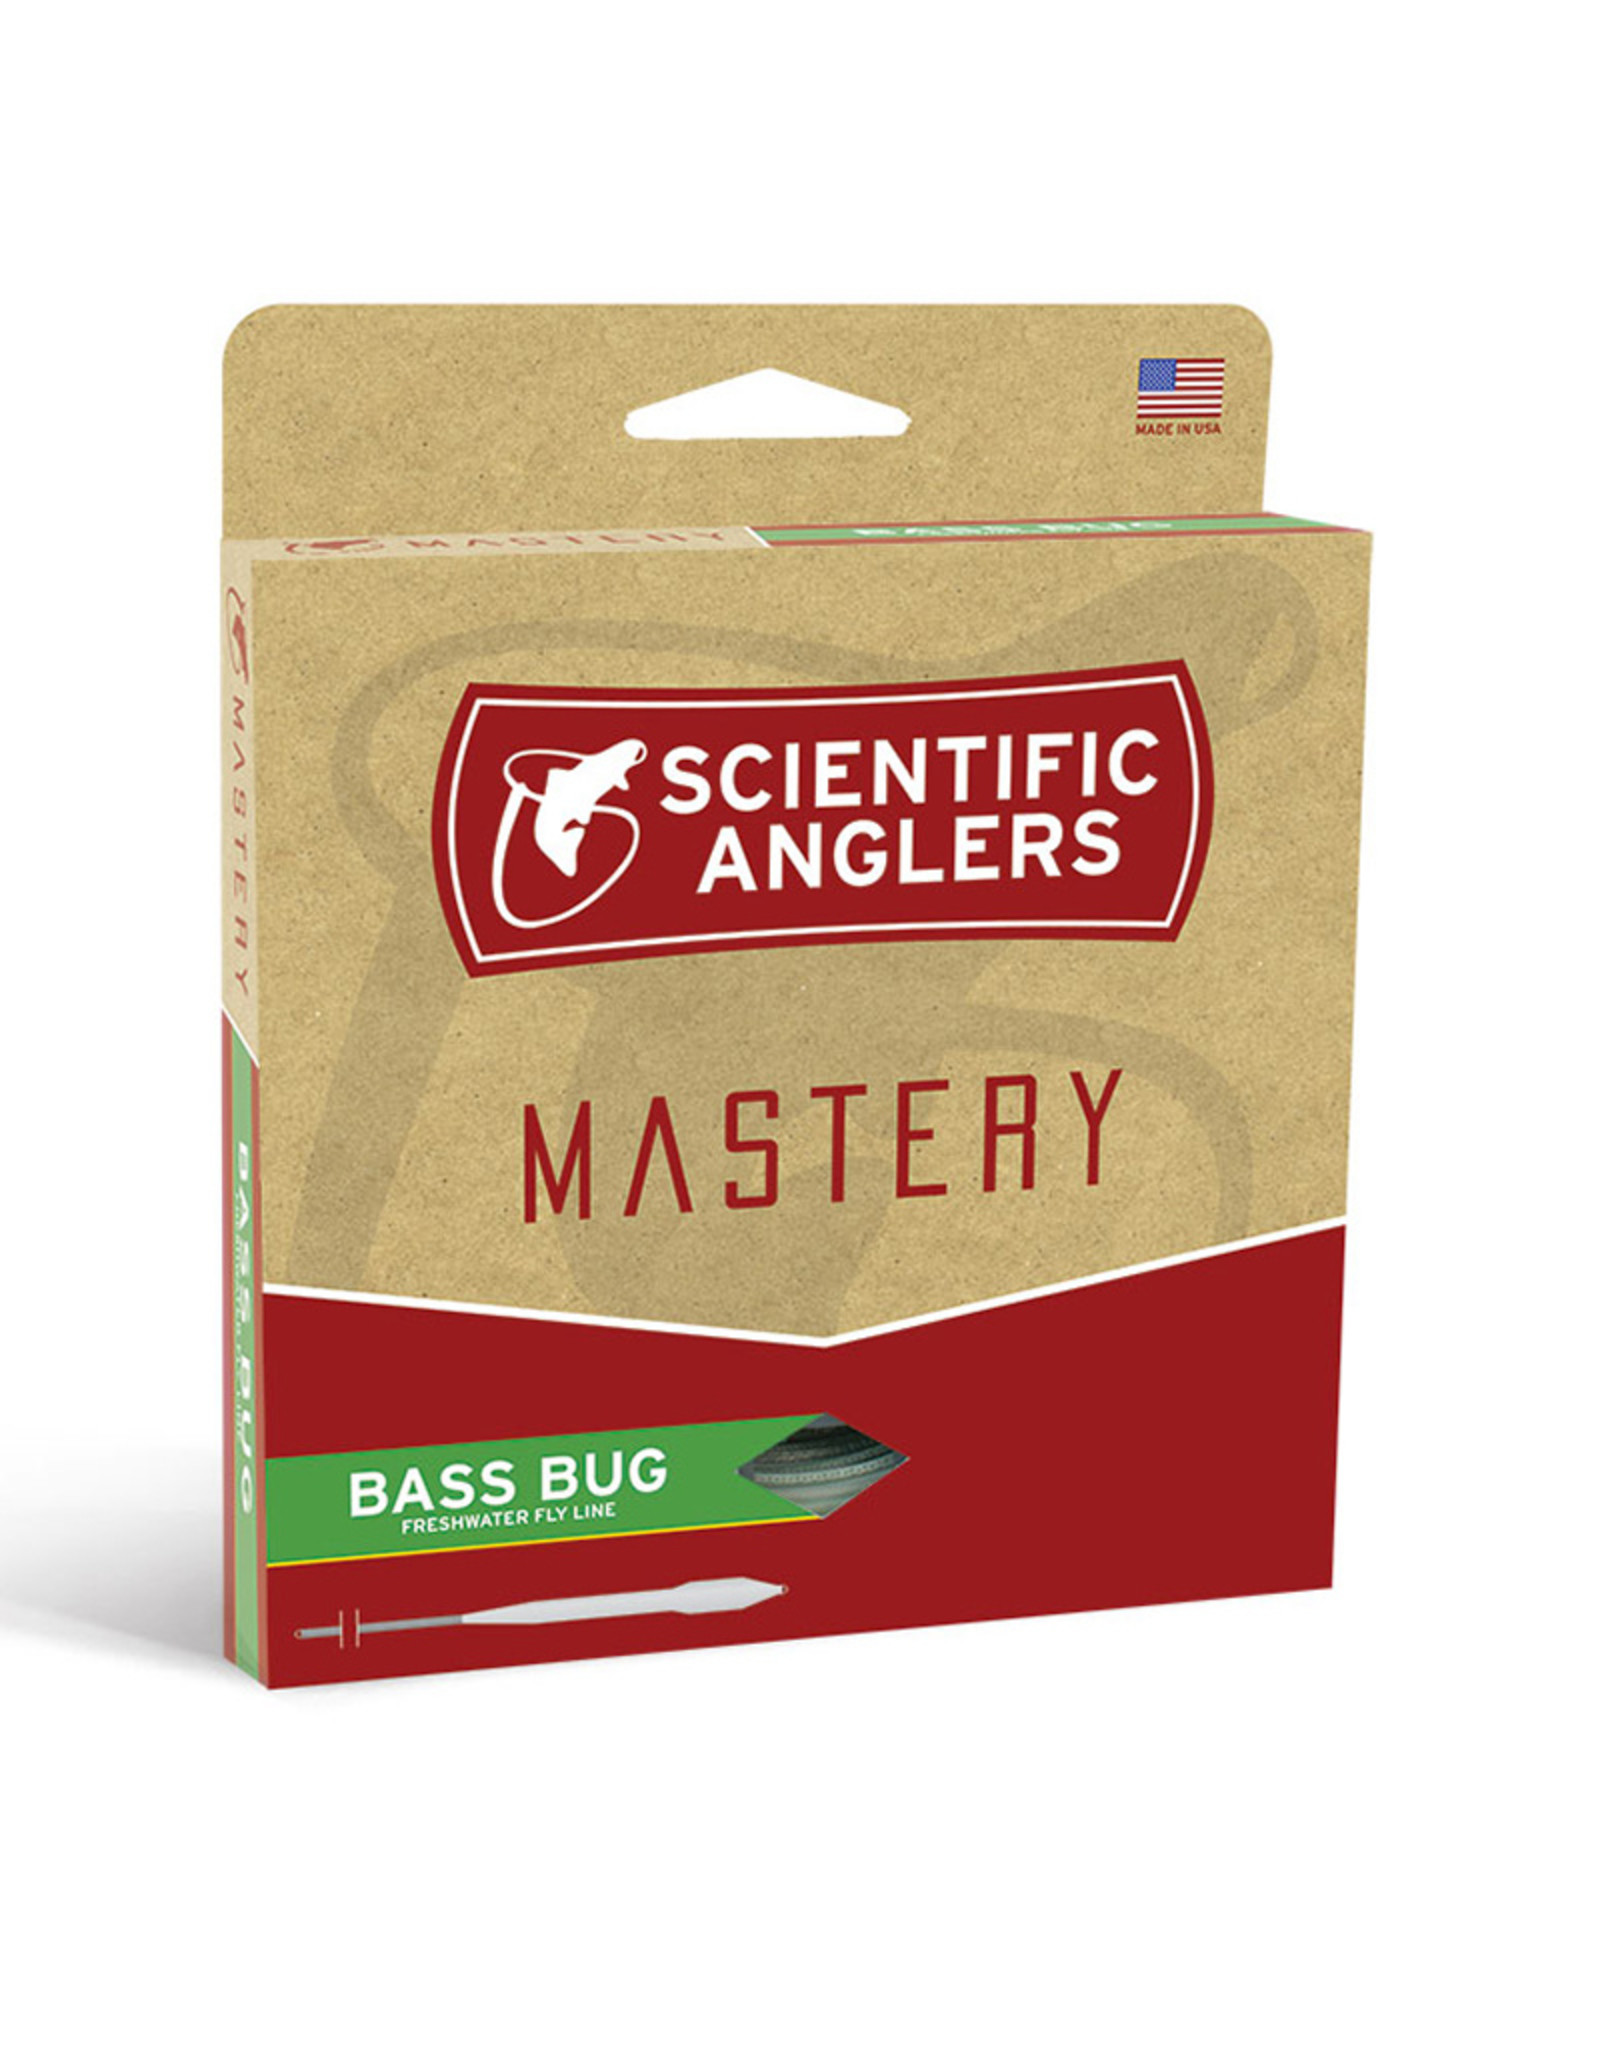 Scientific Anglers Mastery Bass Bug